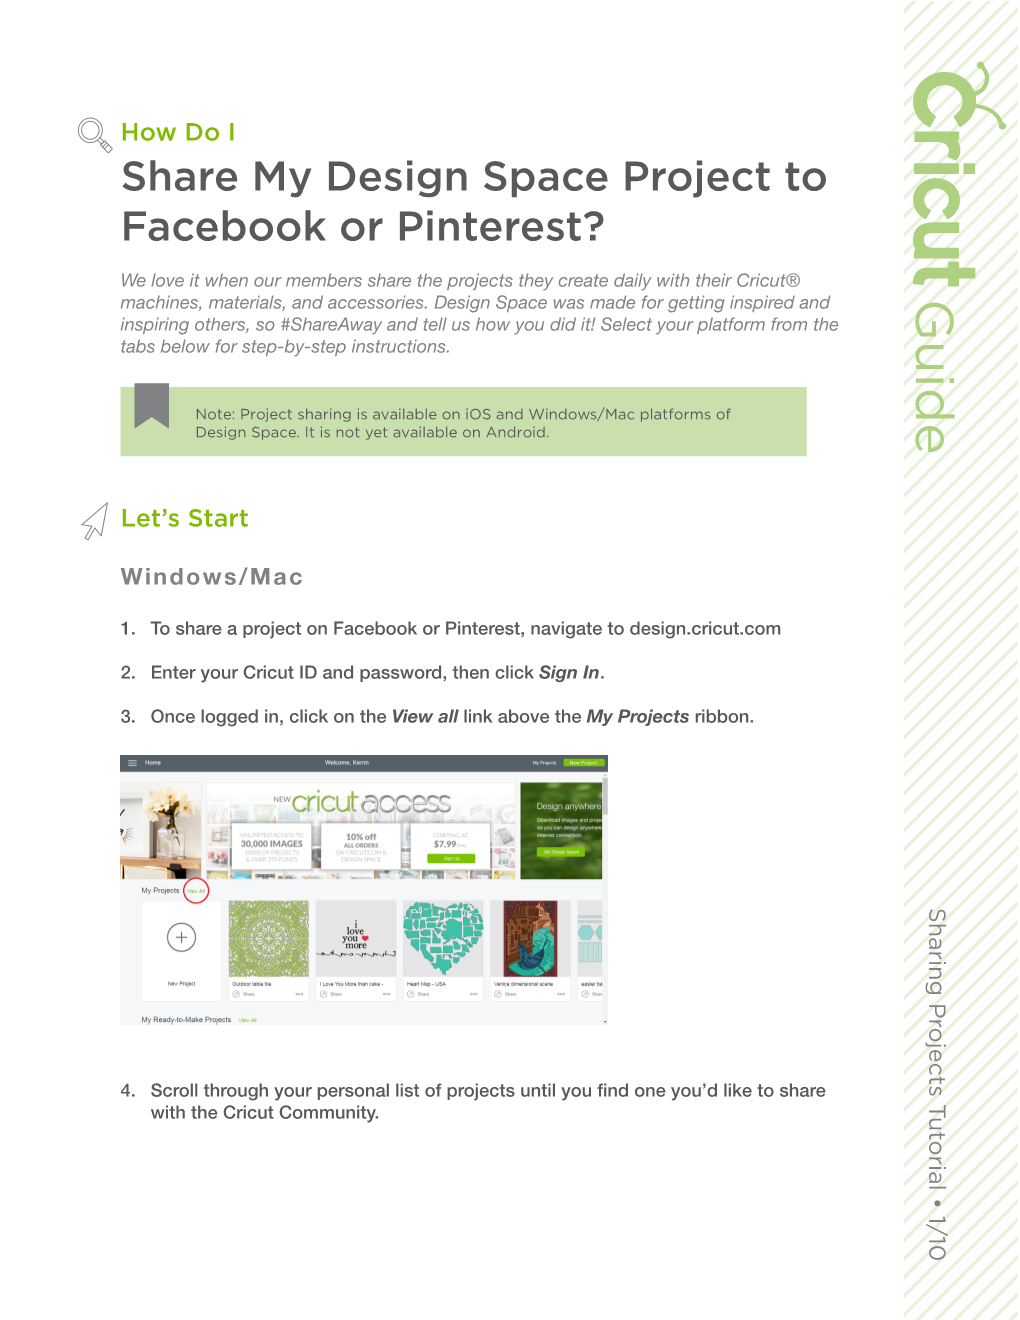 Share My Design Space Project to Facebook Or Pinterest?